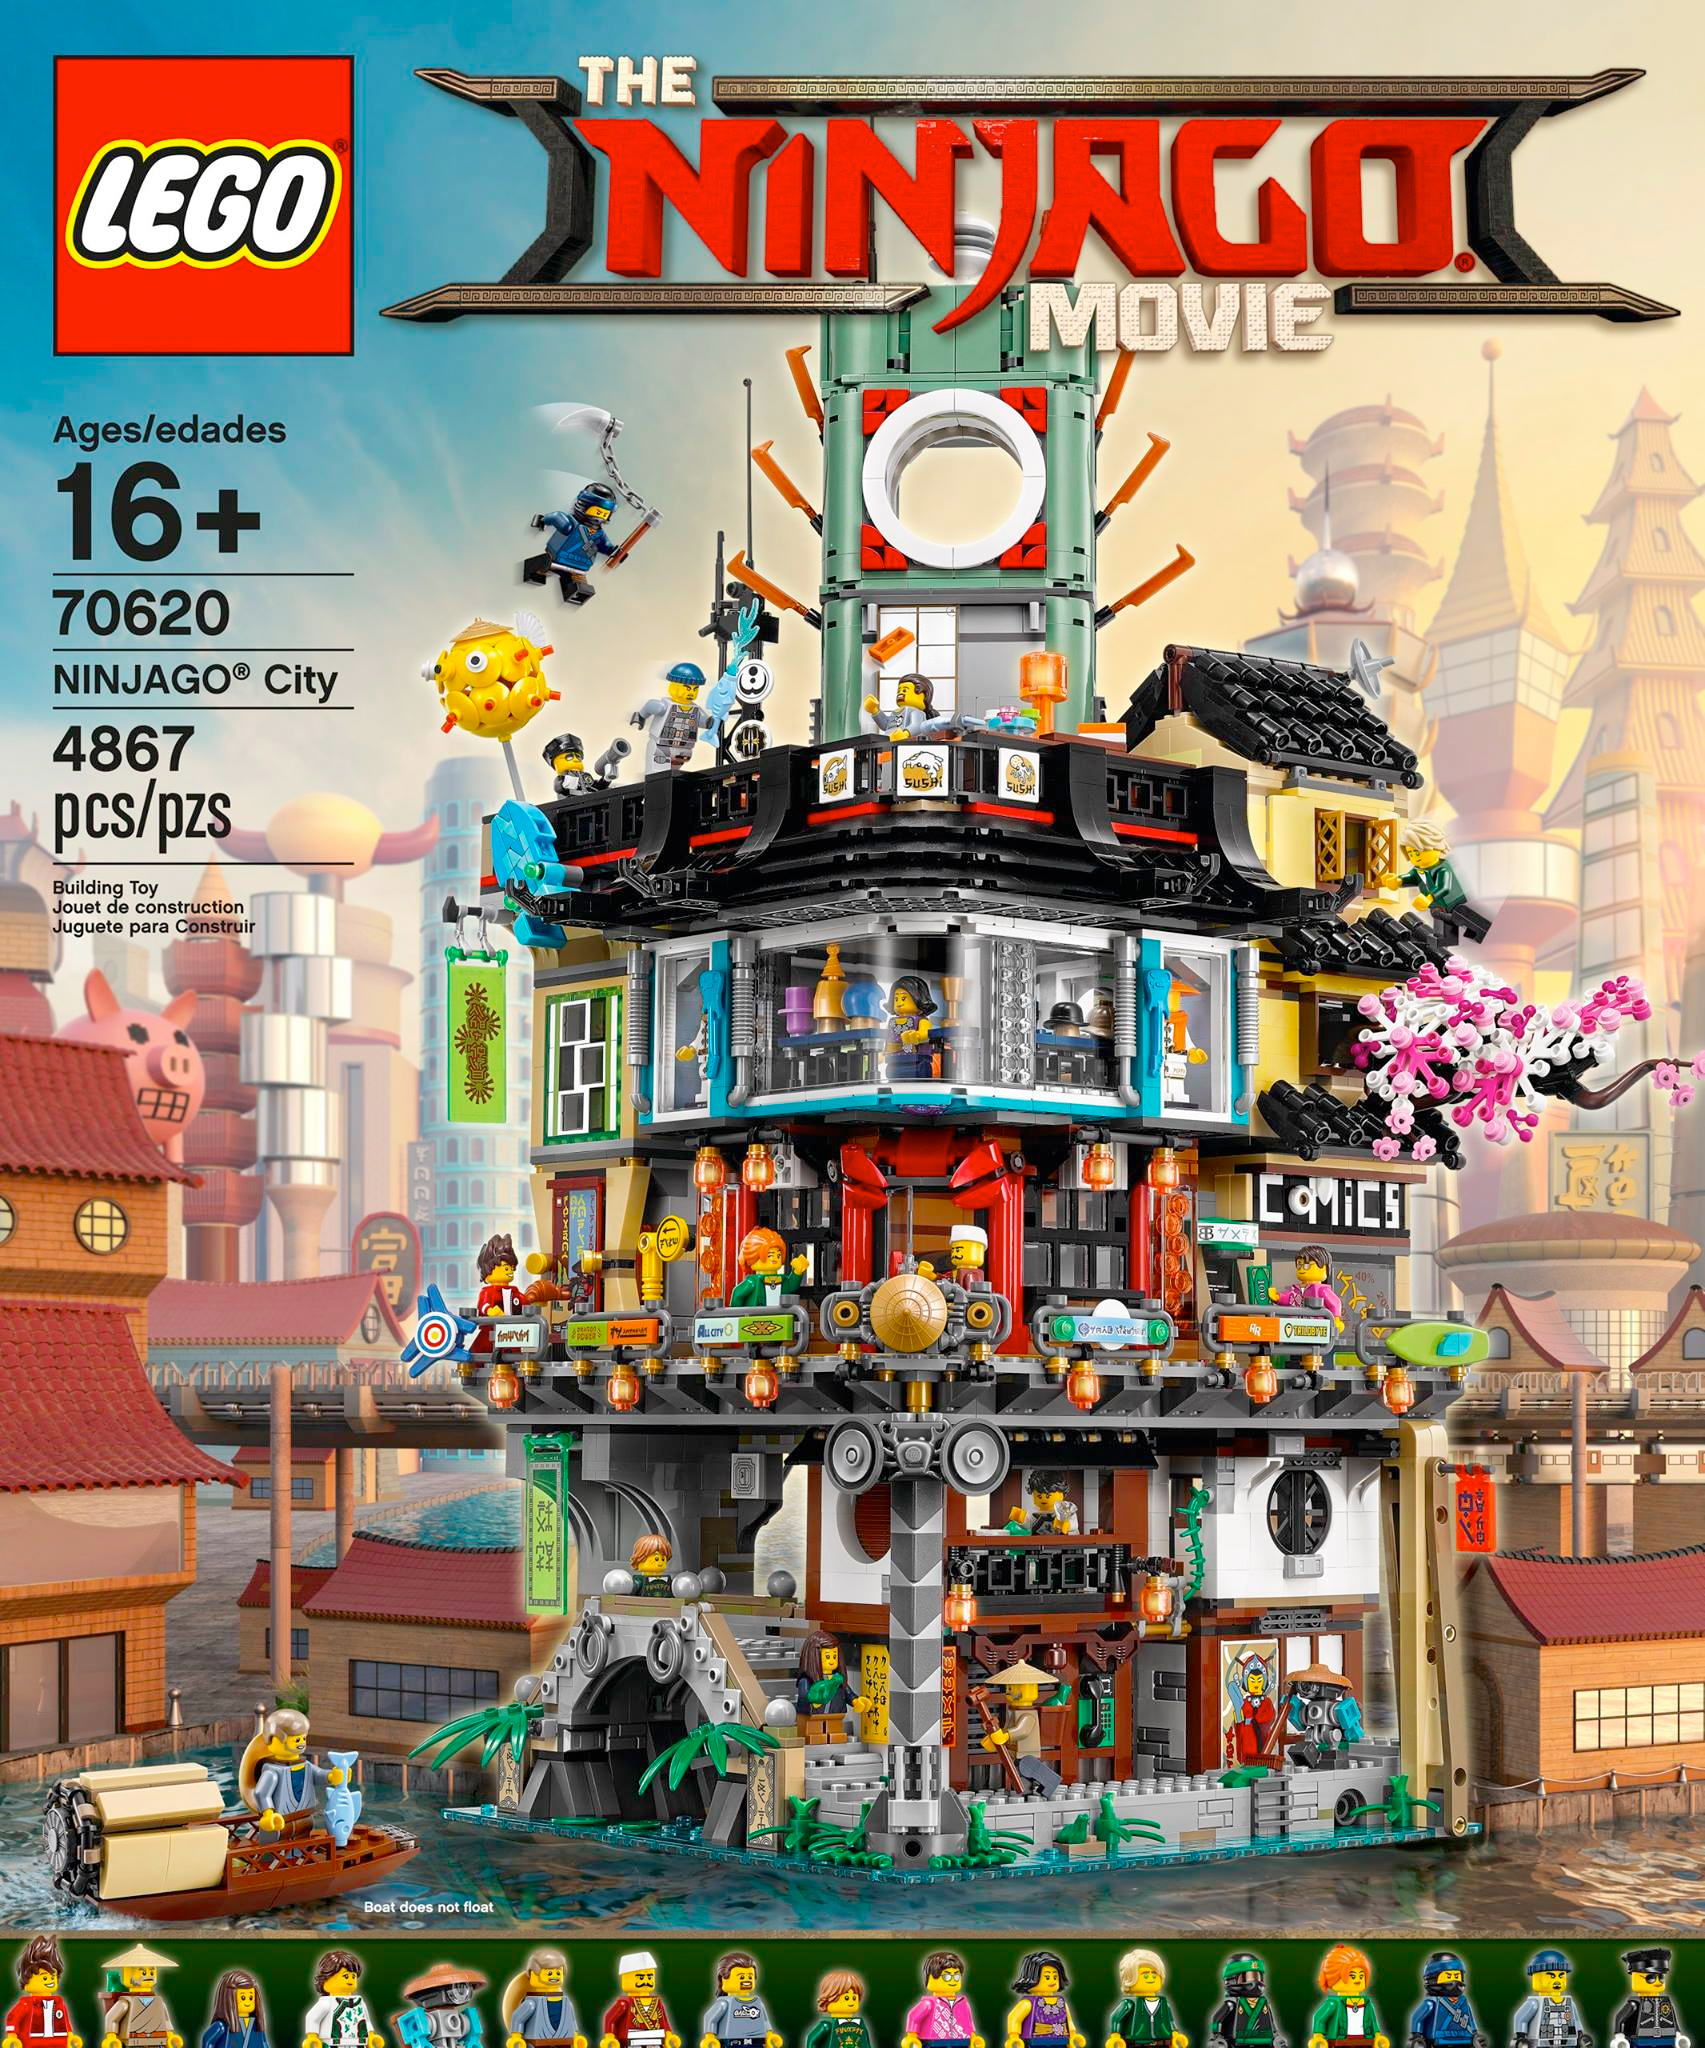 Cool Stuff This Official Lego Ninjago Movie Lego Set Is The Third Largest Ever Released